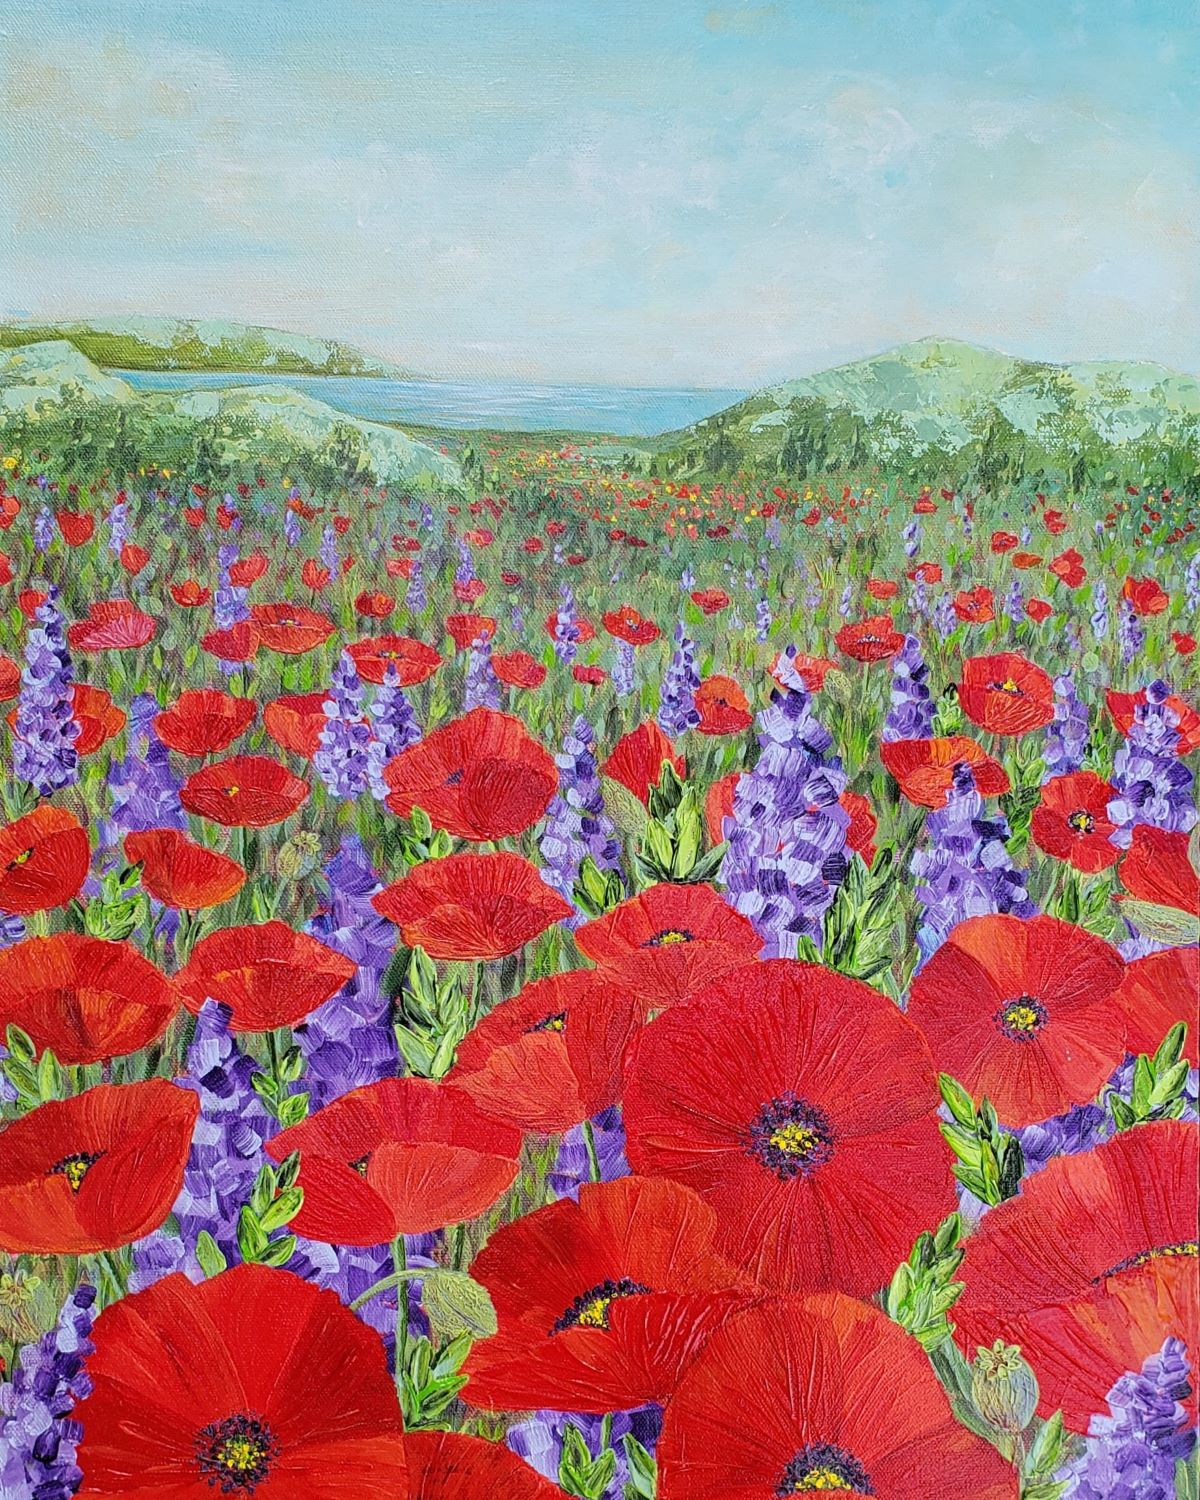 Original artwork. Landscape Painting of a field of red poppies and purple lupins painted in acrylic.